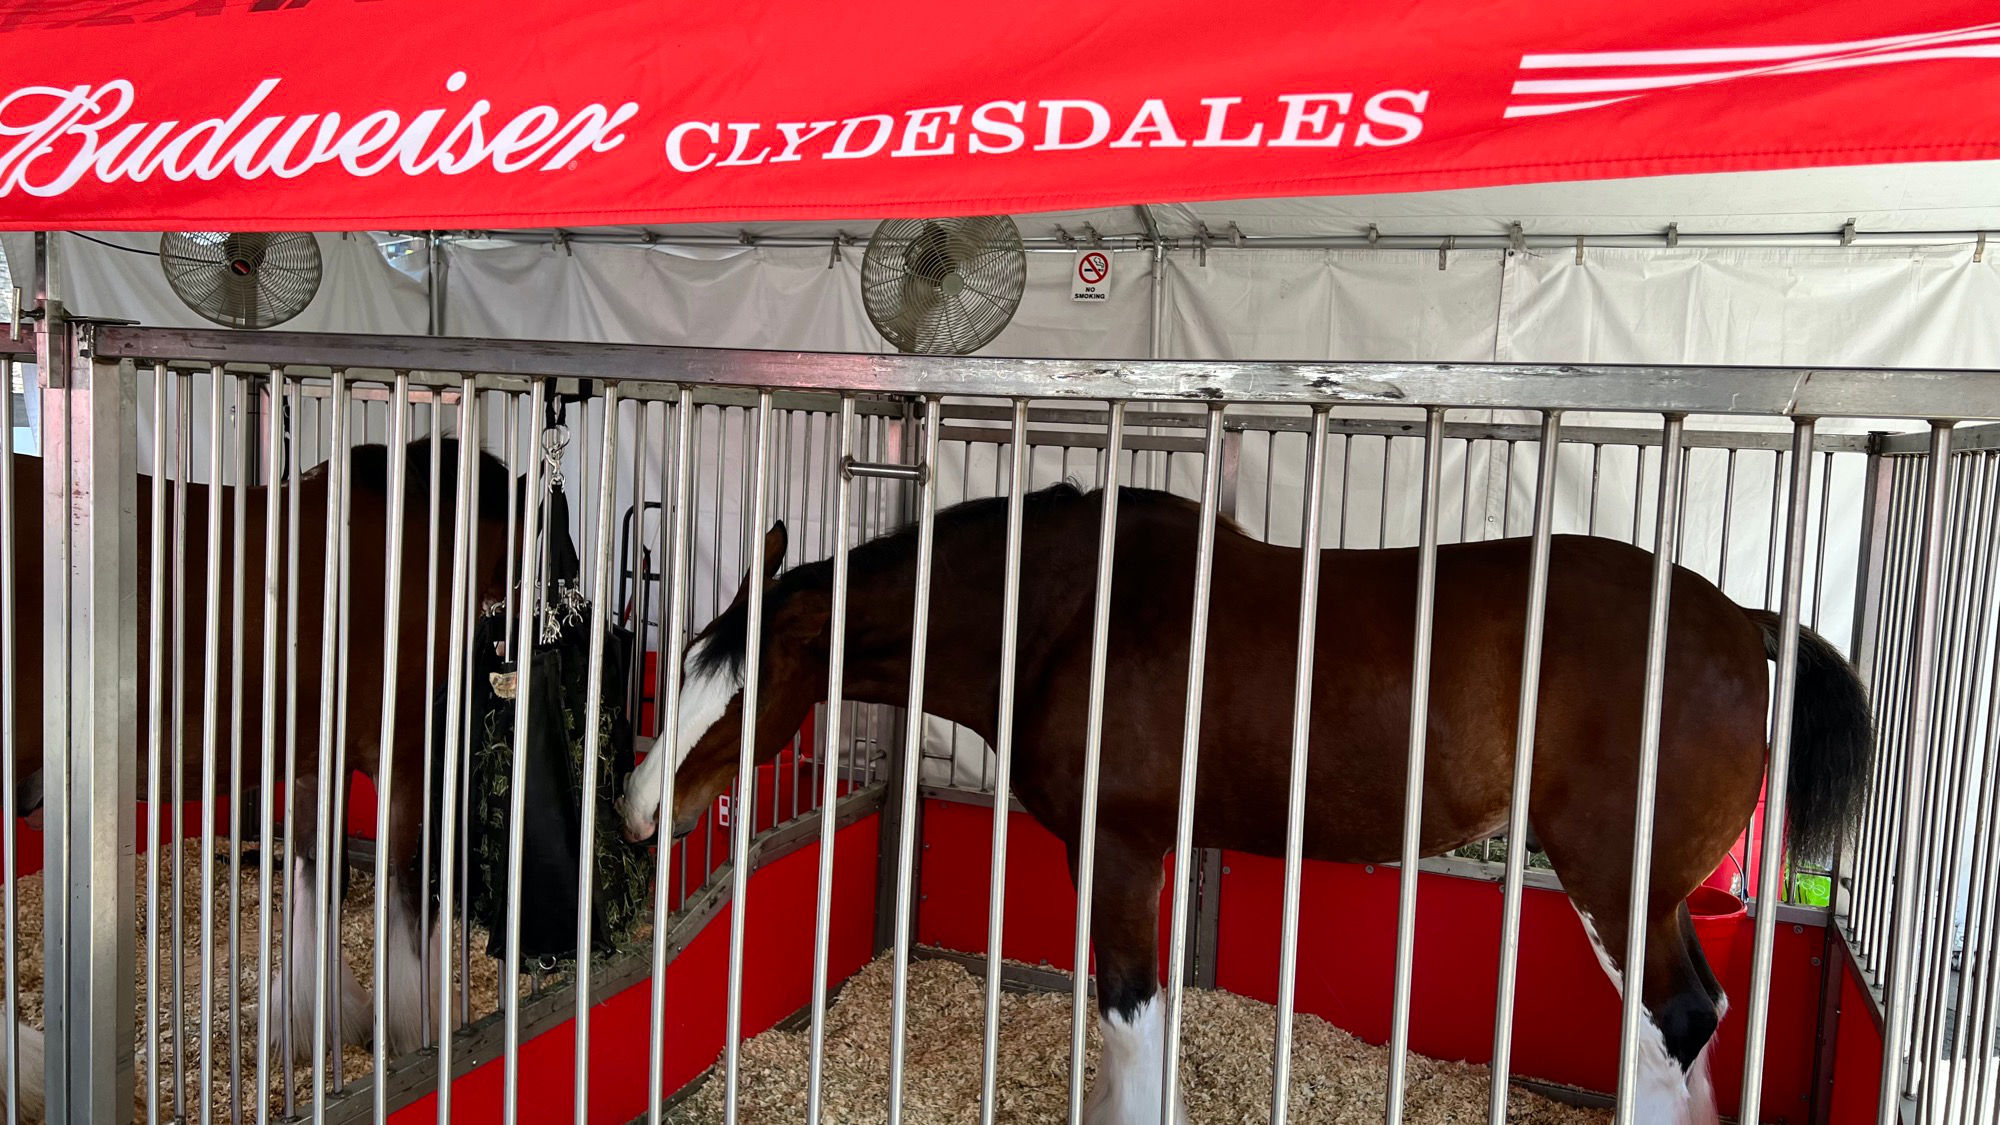 Budweiser Clydesdales 3